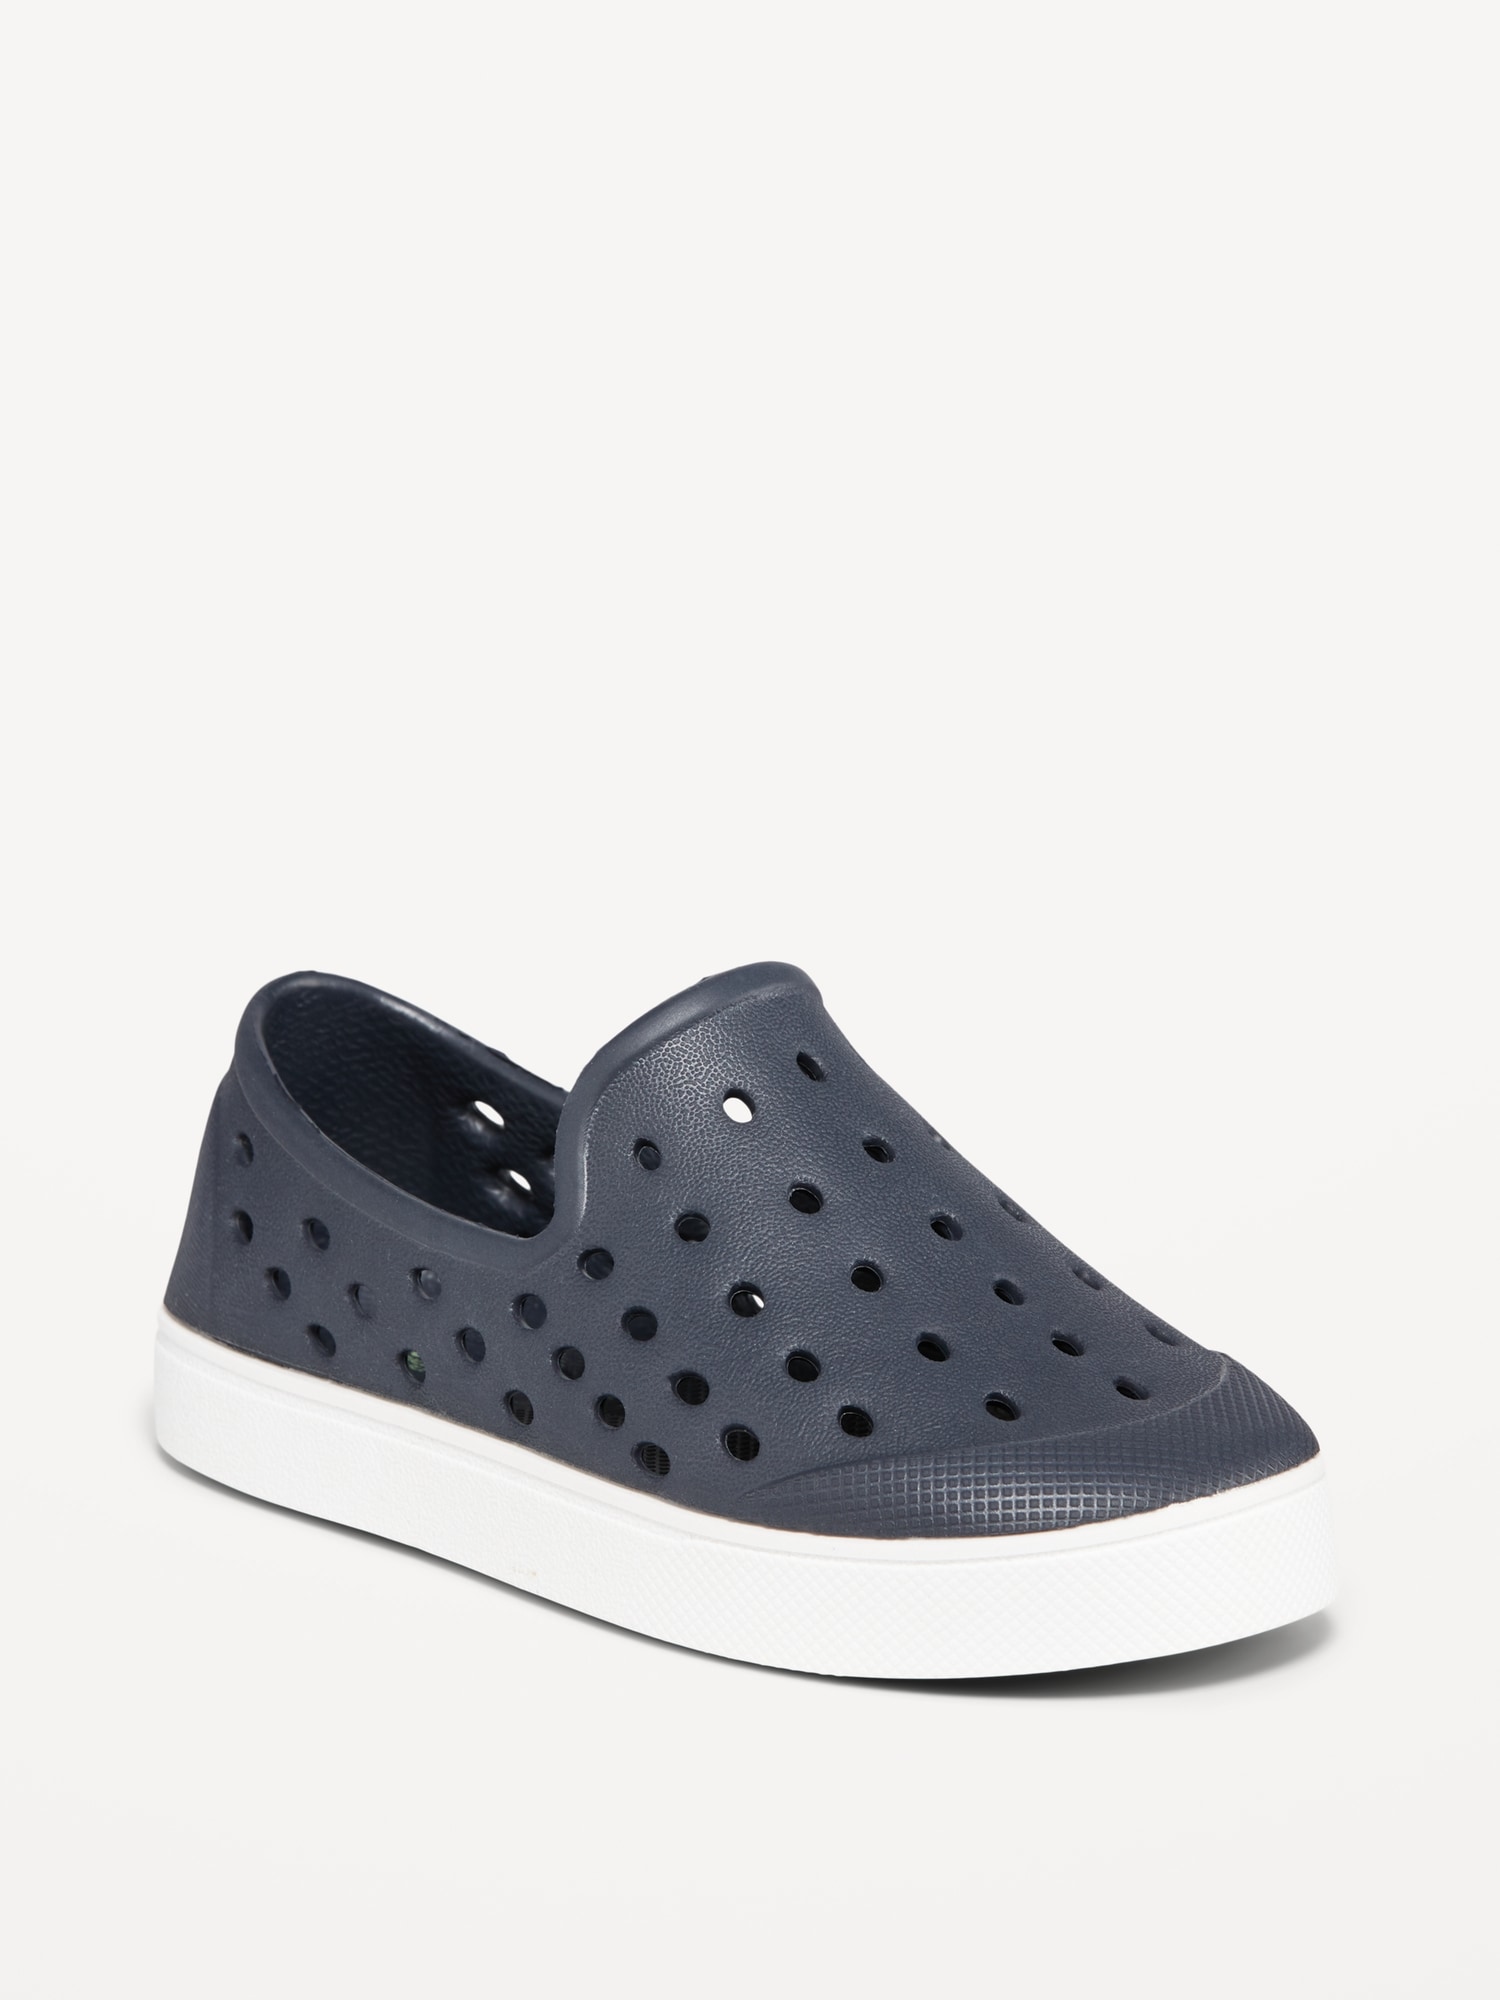 Perforated Slip-On Shoes for Toddler Boys